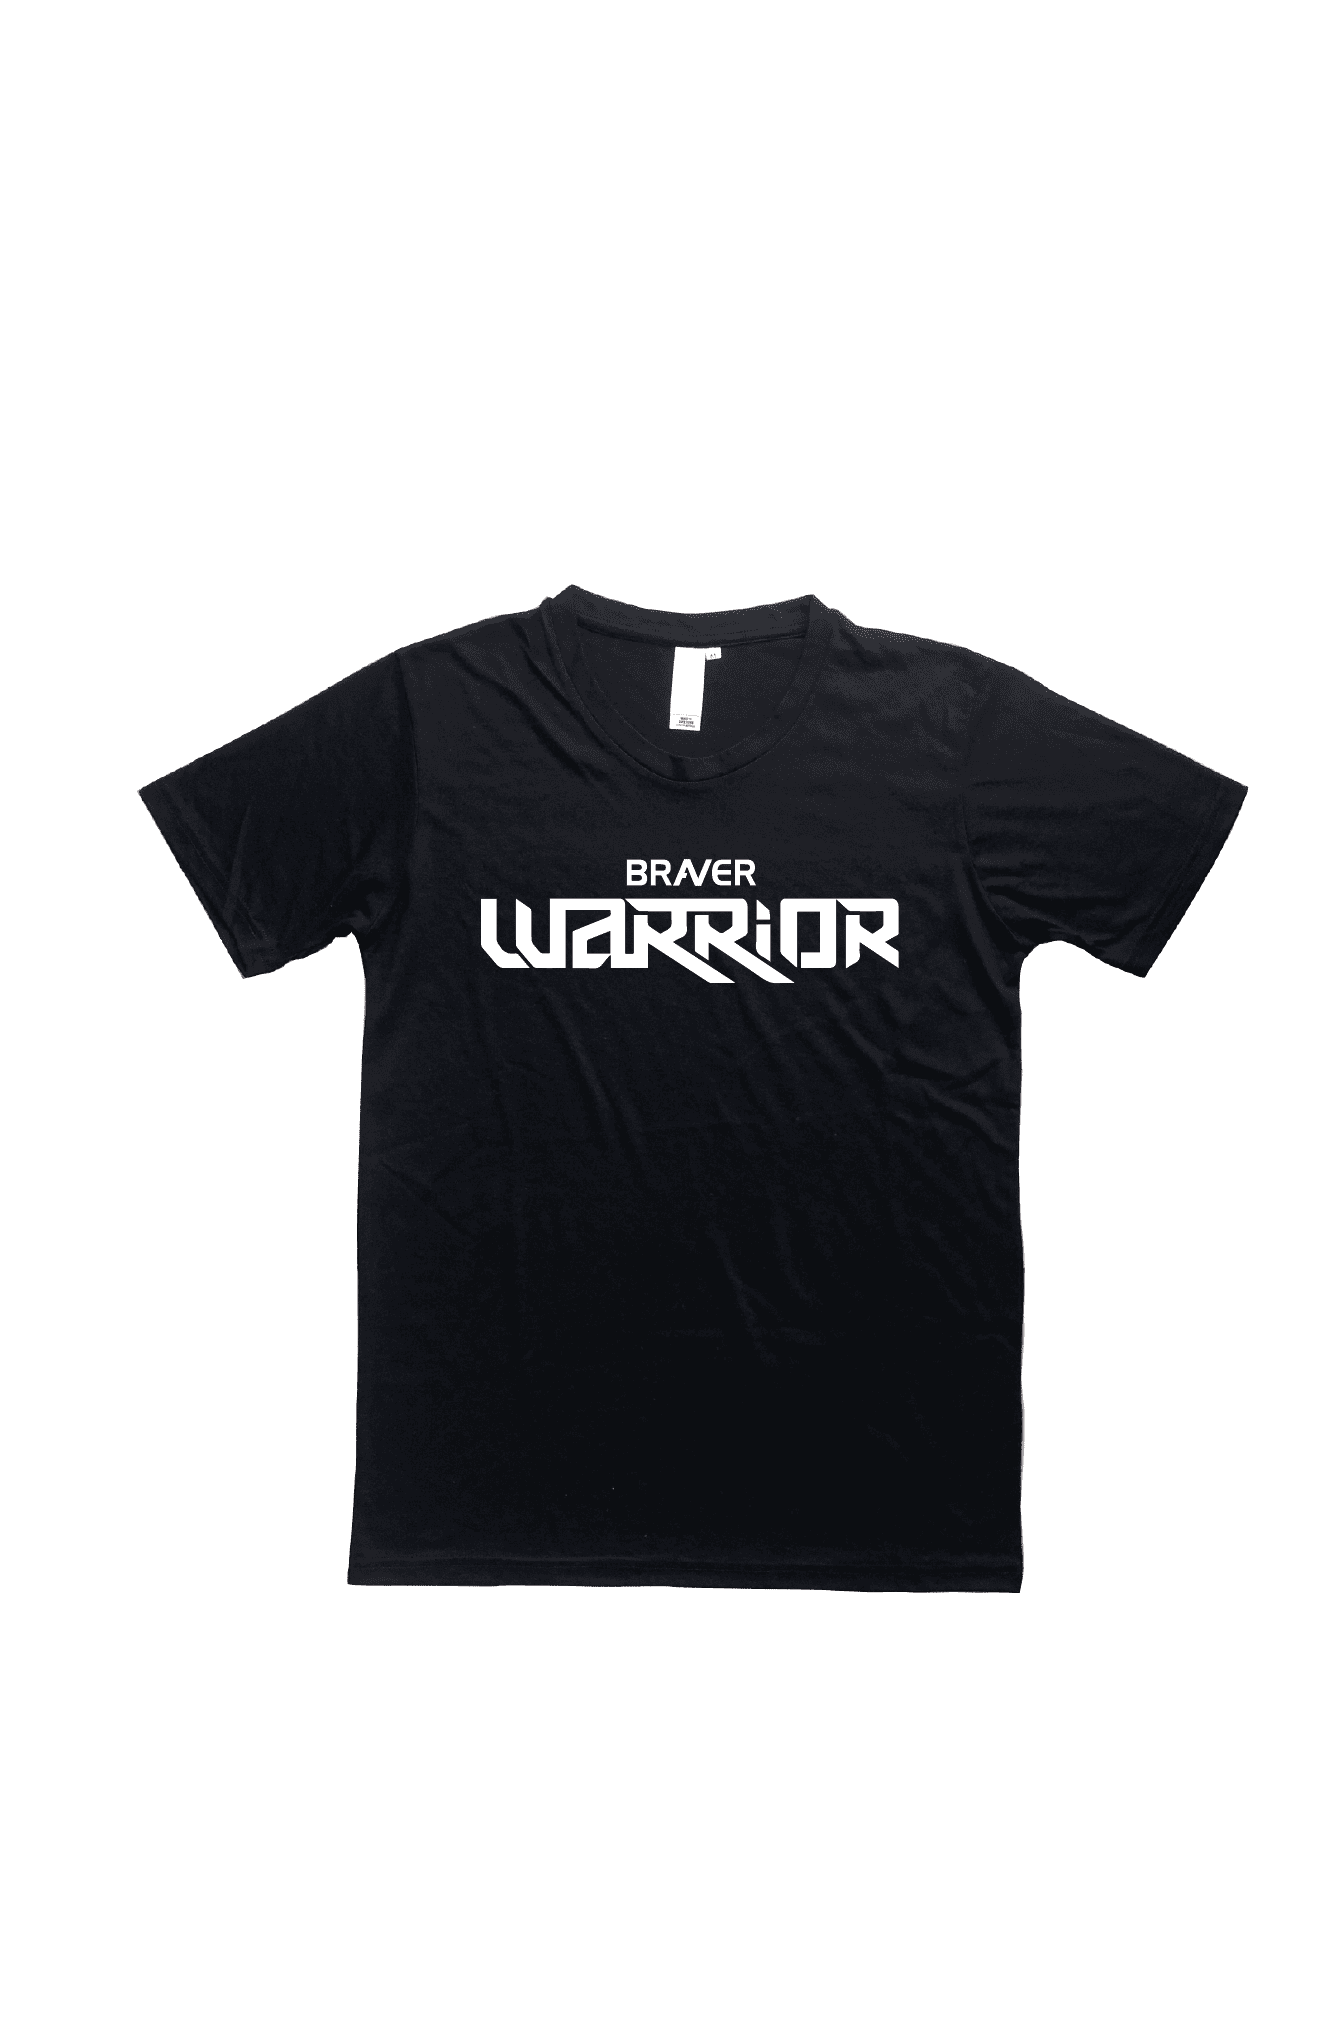 Black unisex tshirt with text printed in white that says Braver warrior